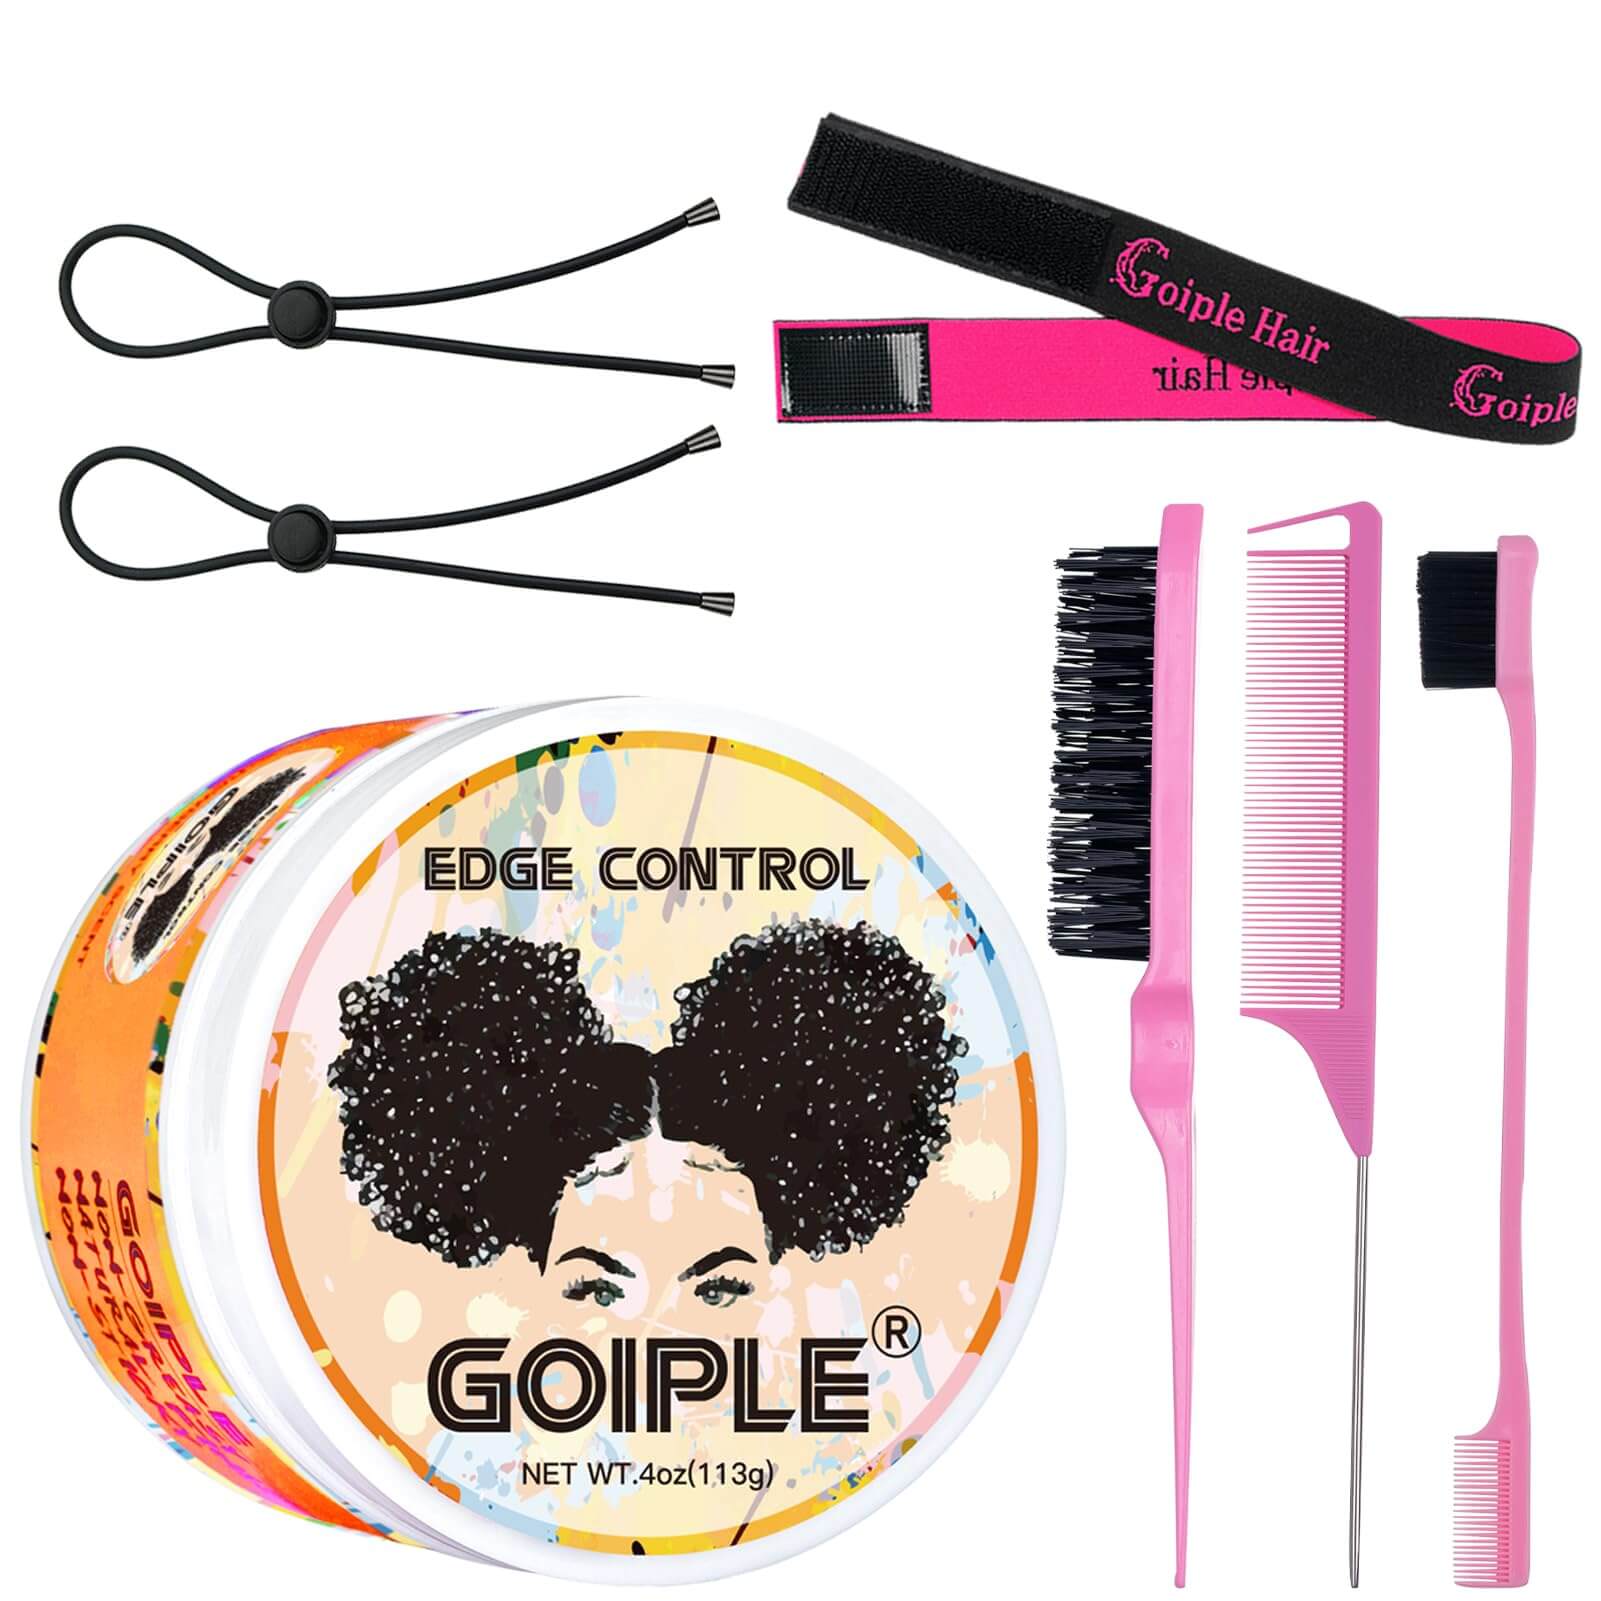 Edge Control Wax for Women Strong Hold Non-greasy (Citrus Scent)